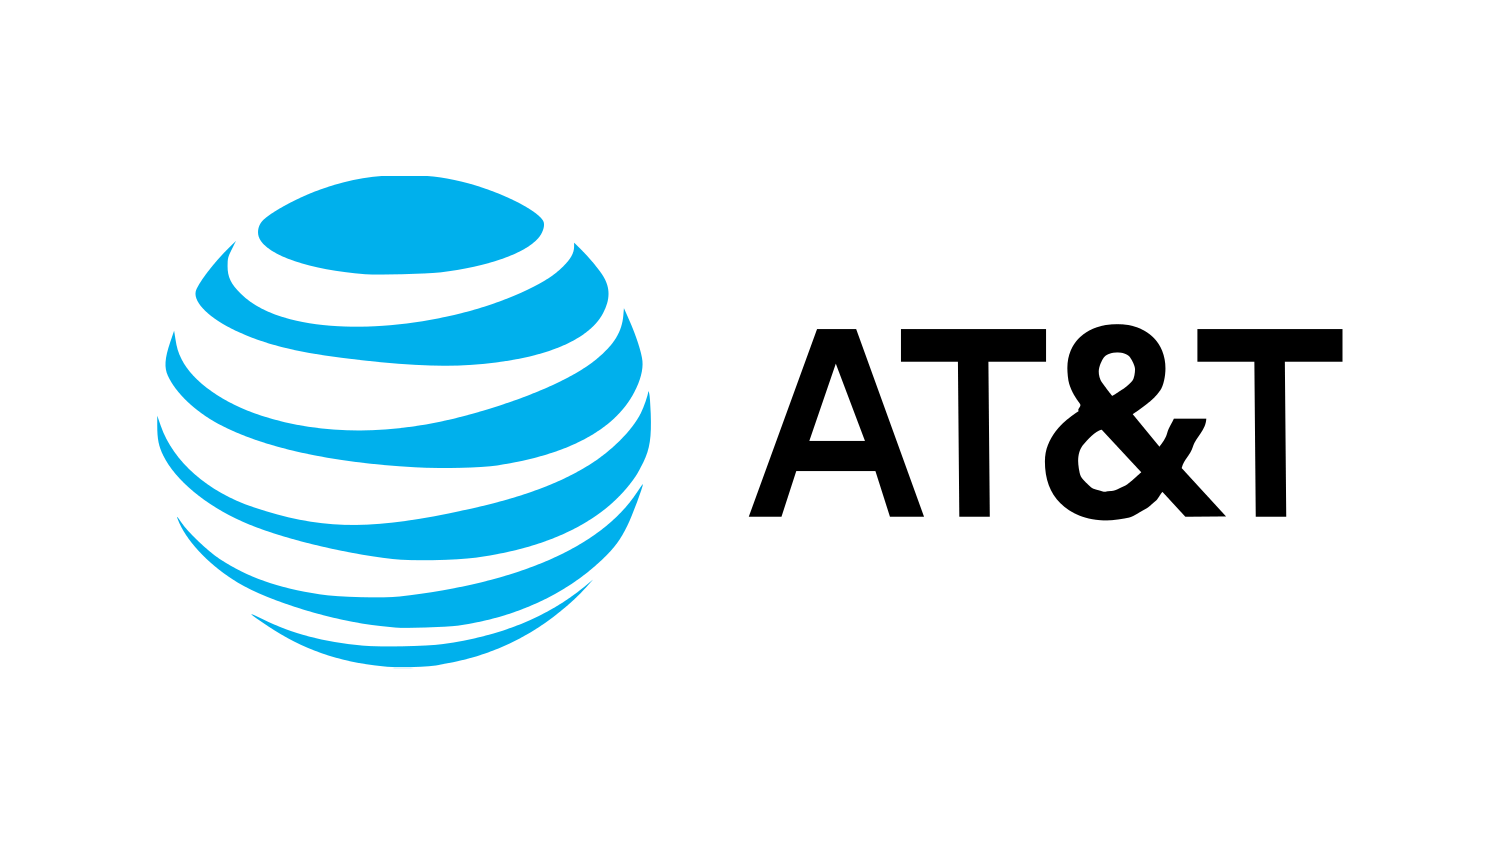 Sponsored by AT&T